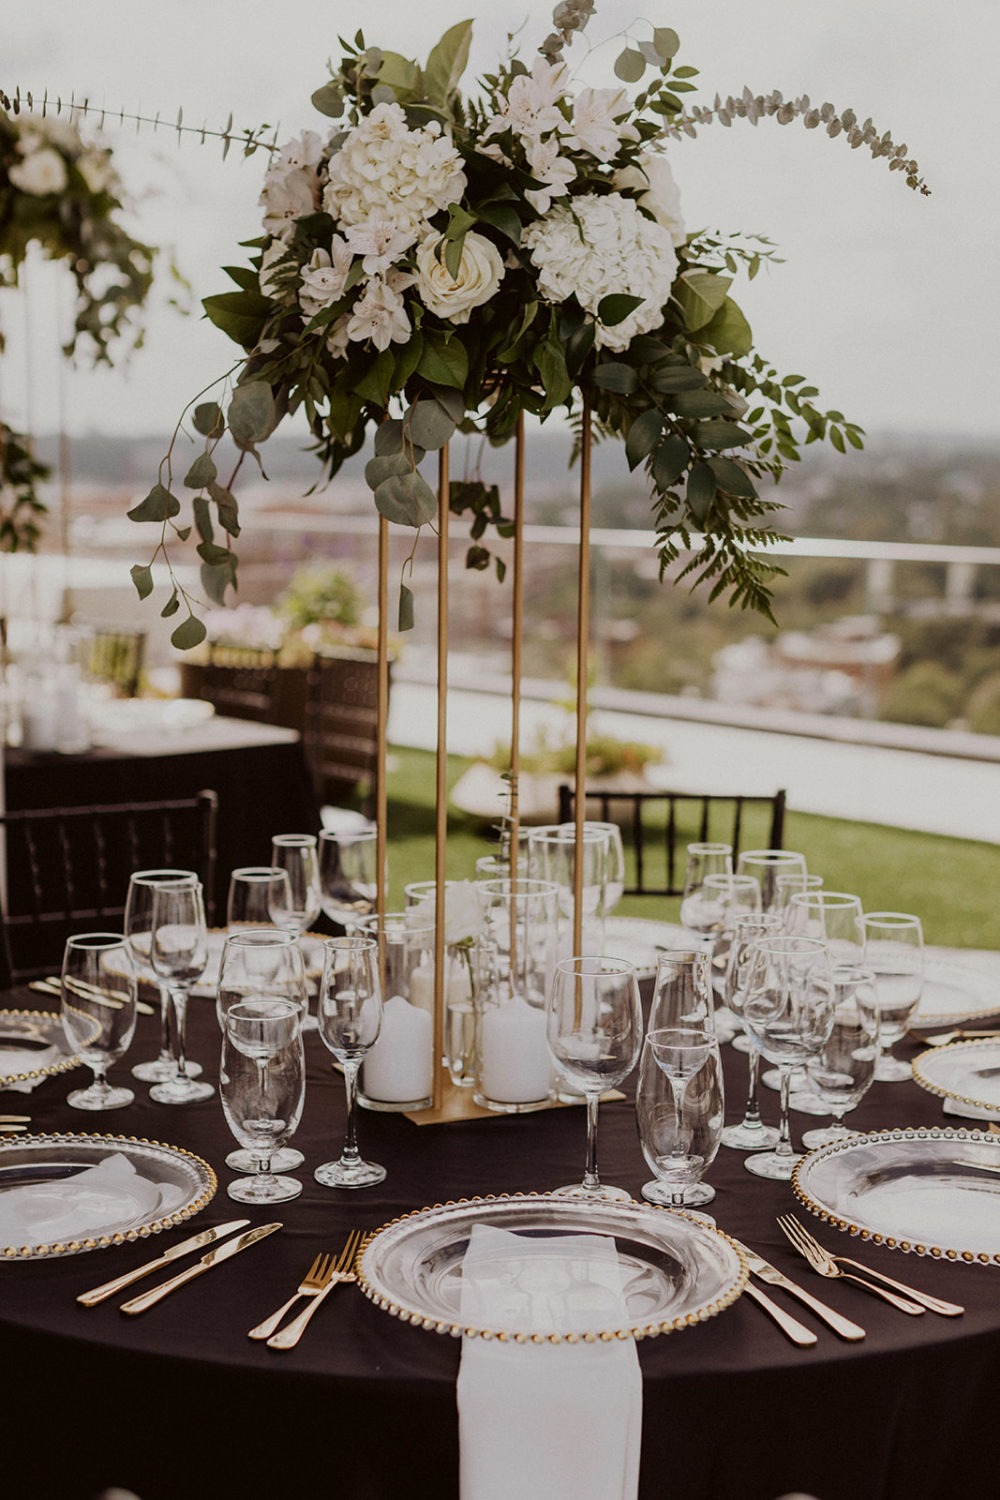 white flowers on gold decor with black tablecloth